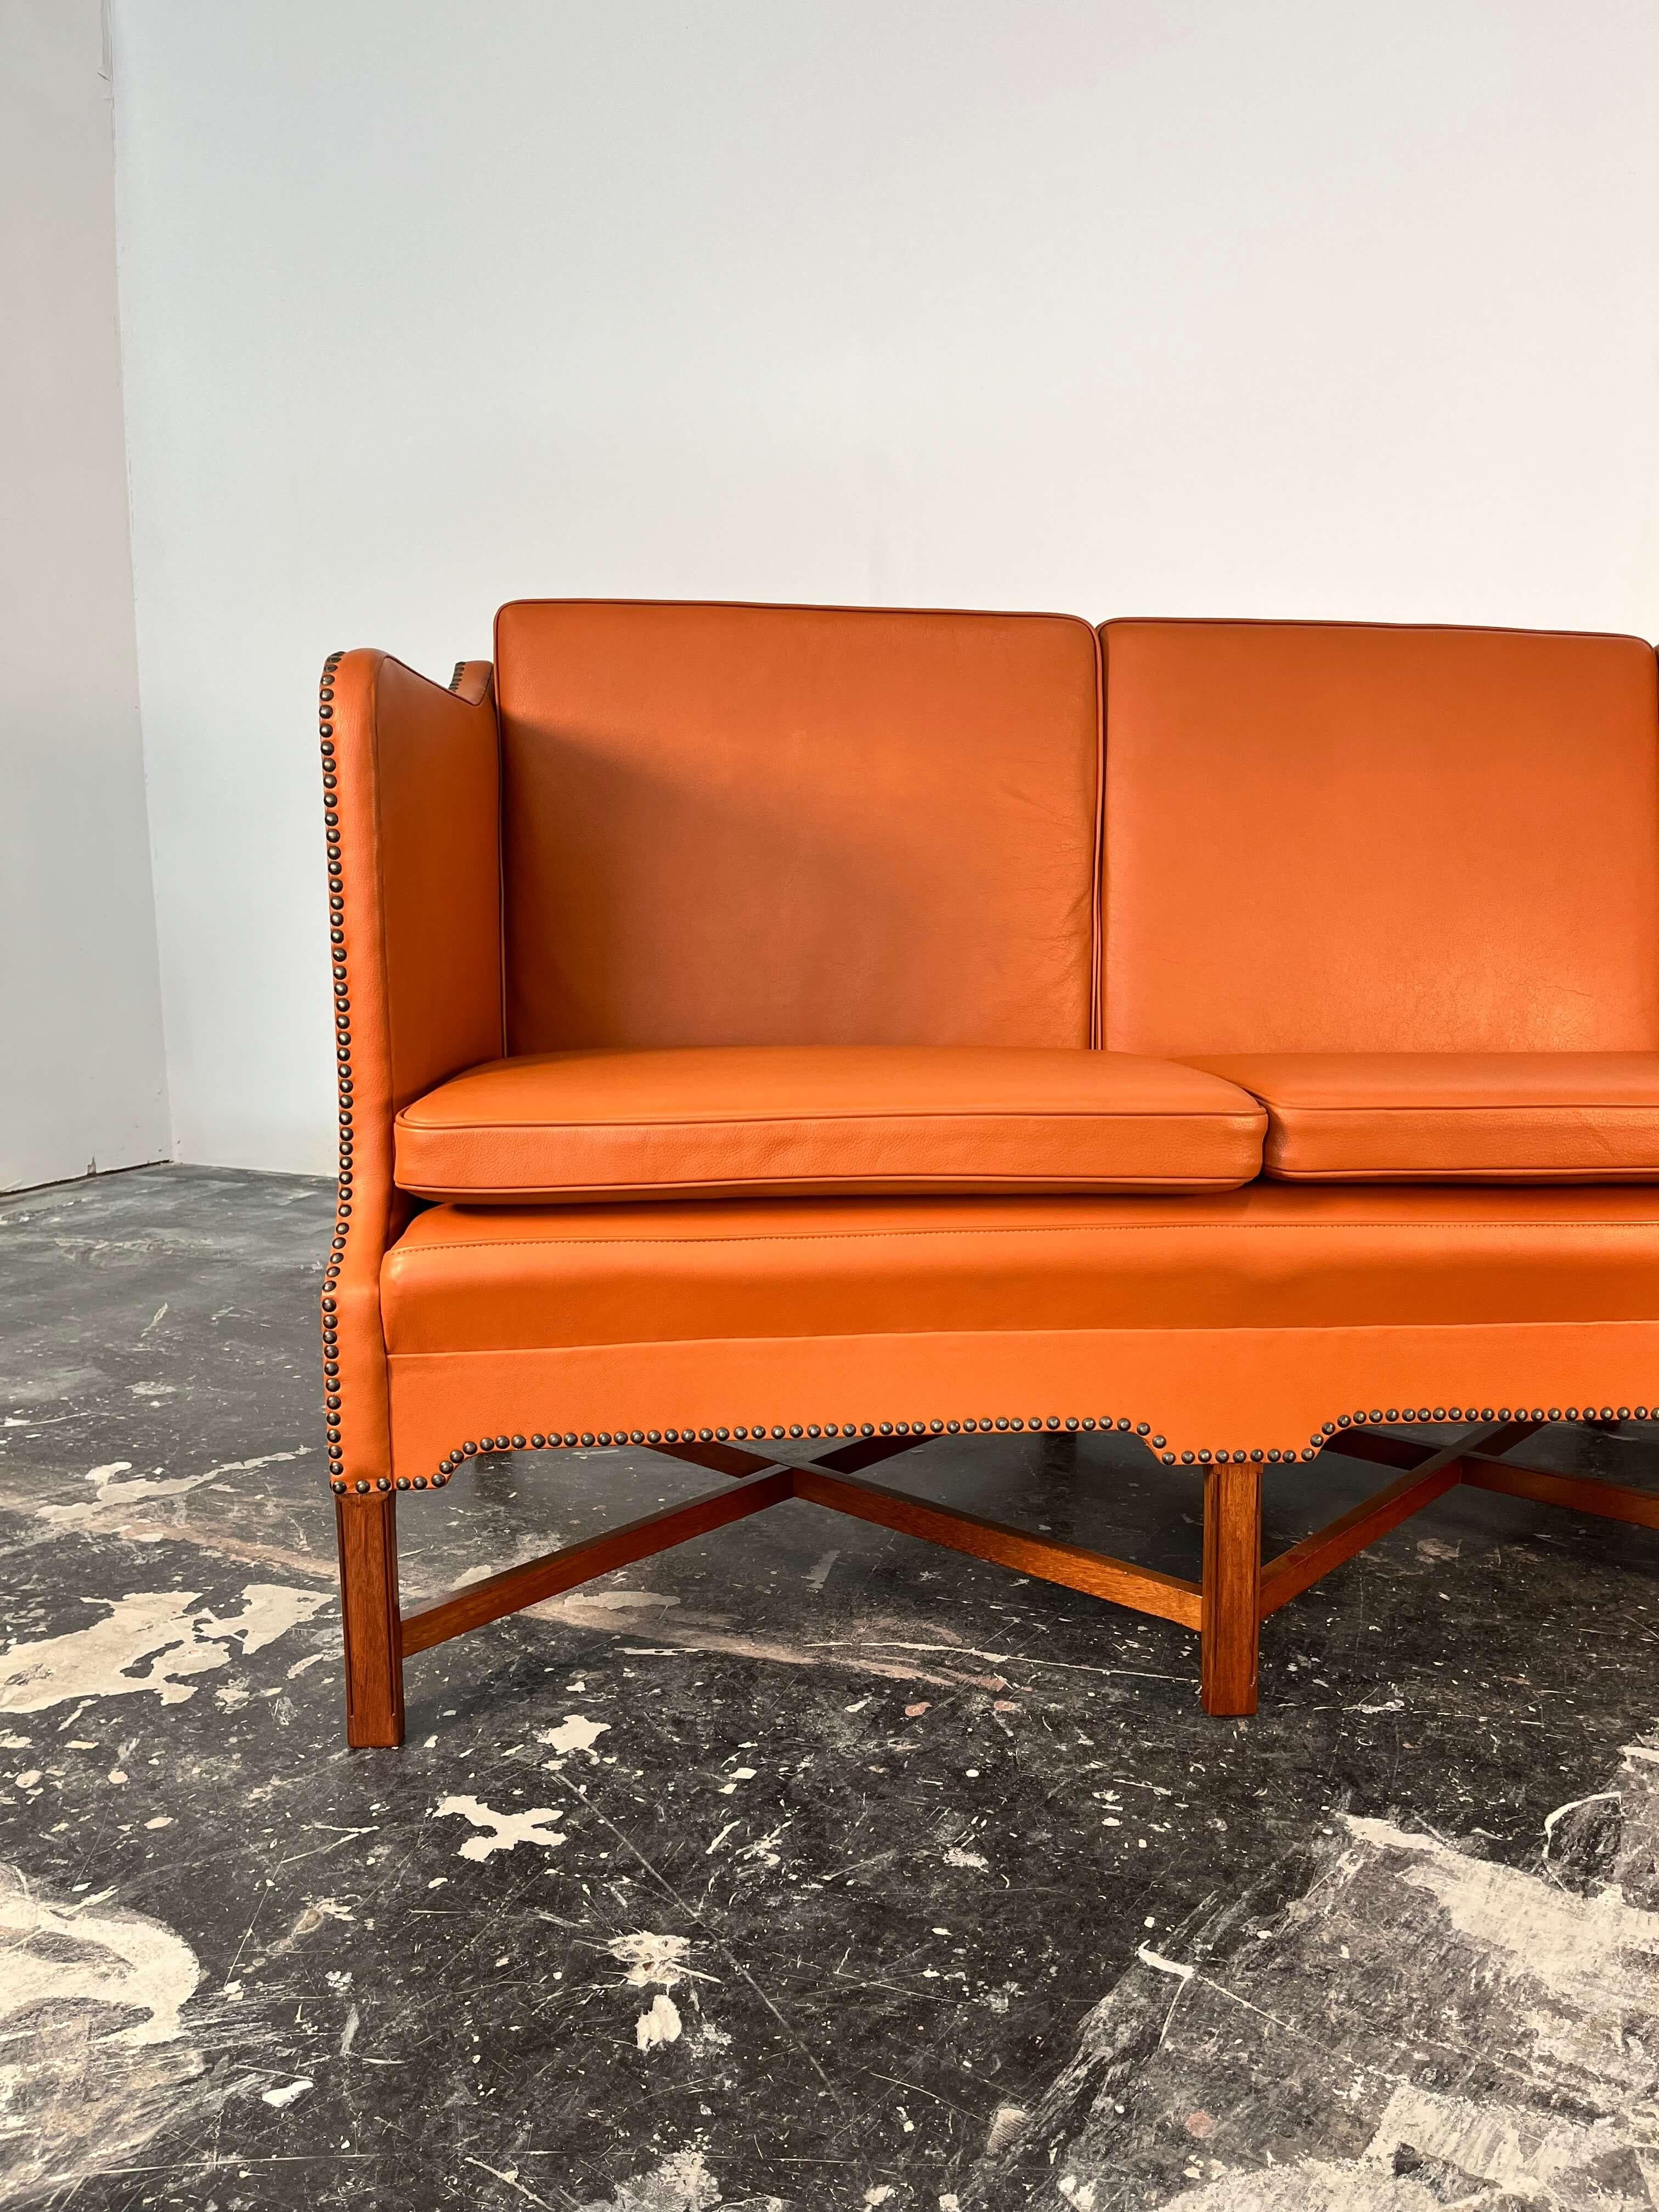 Kaare Klint Sofa Model 4118 in Leather and Mahogany For Sale 3